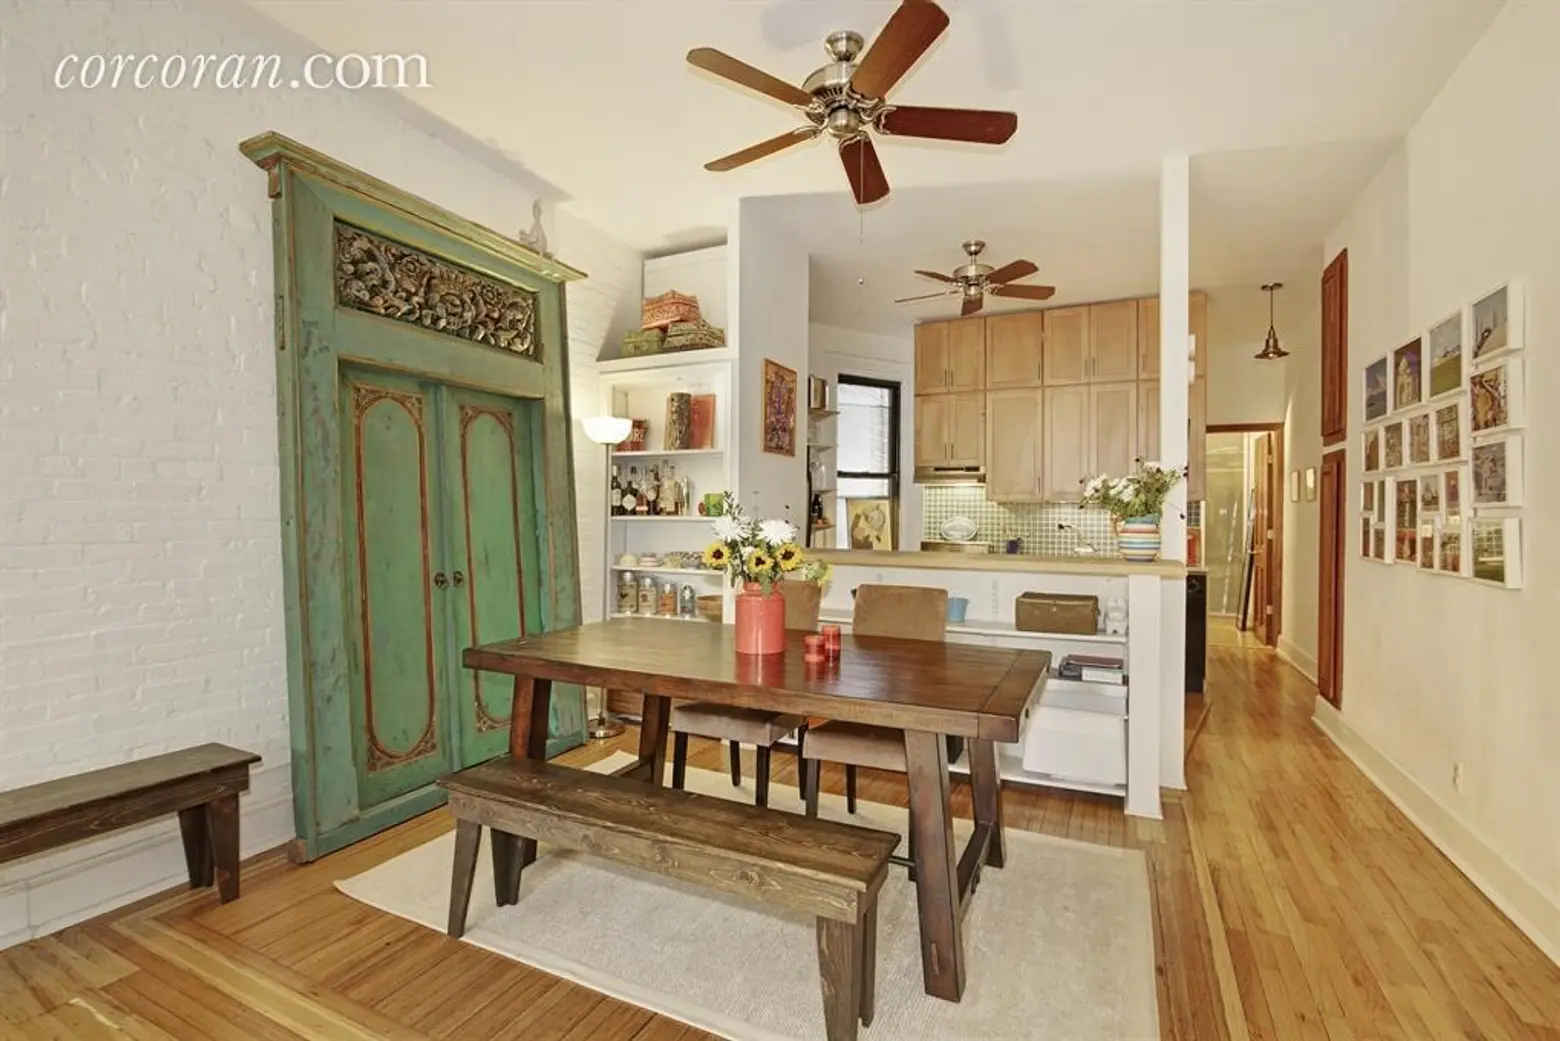 This One-Bedroom Co-op in Park Slope Has the Parisian Touch